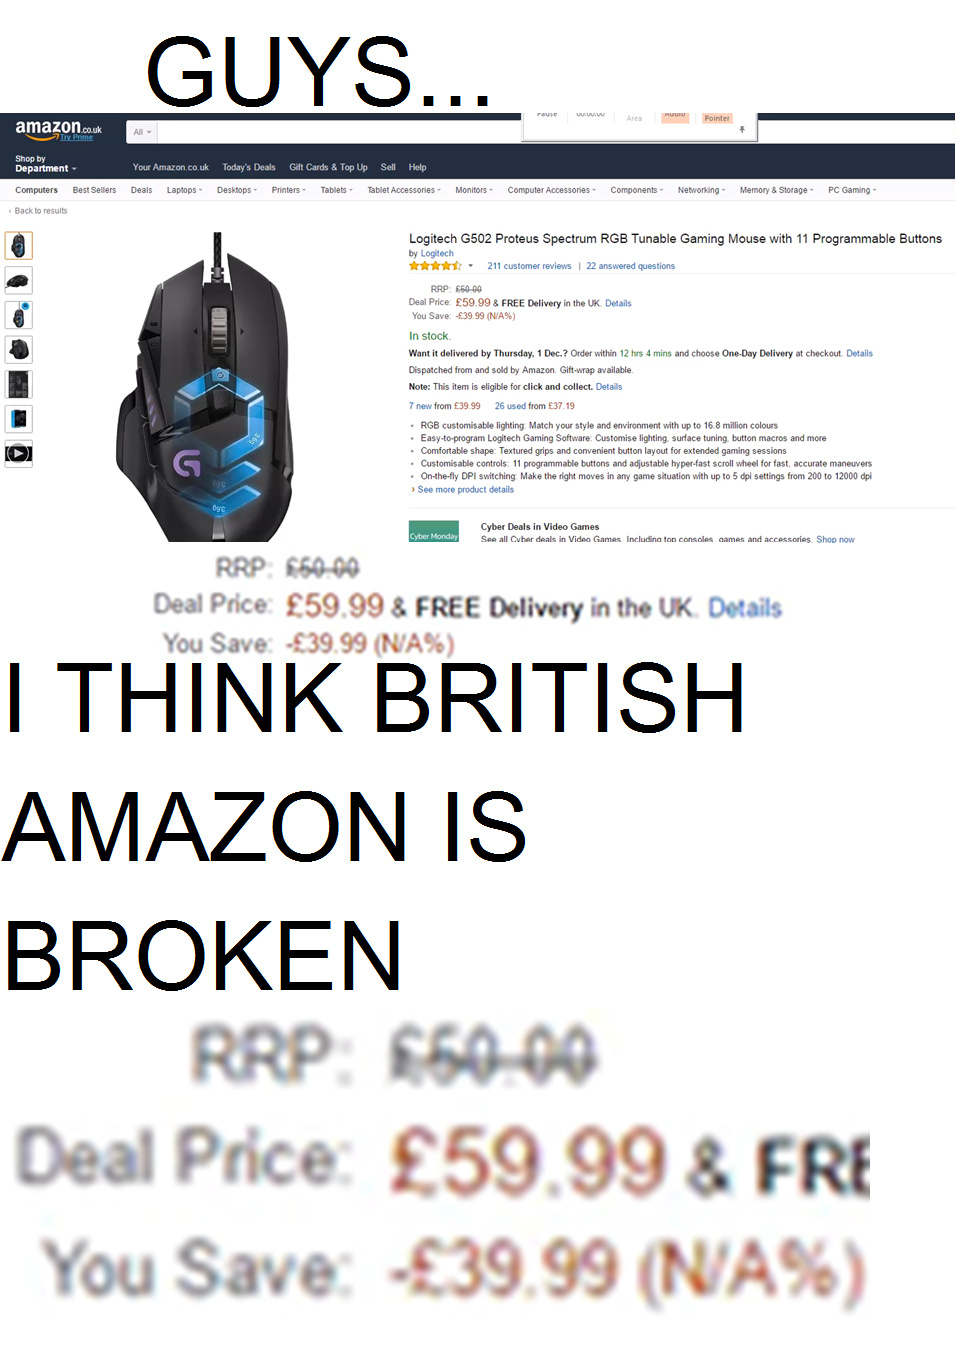 So...It was originally £50, is now £59.99 and yet it says you save -39.99...British Amazon is broken guys...Help us! - meme